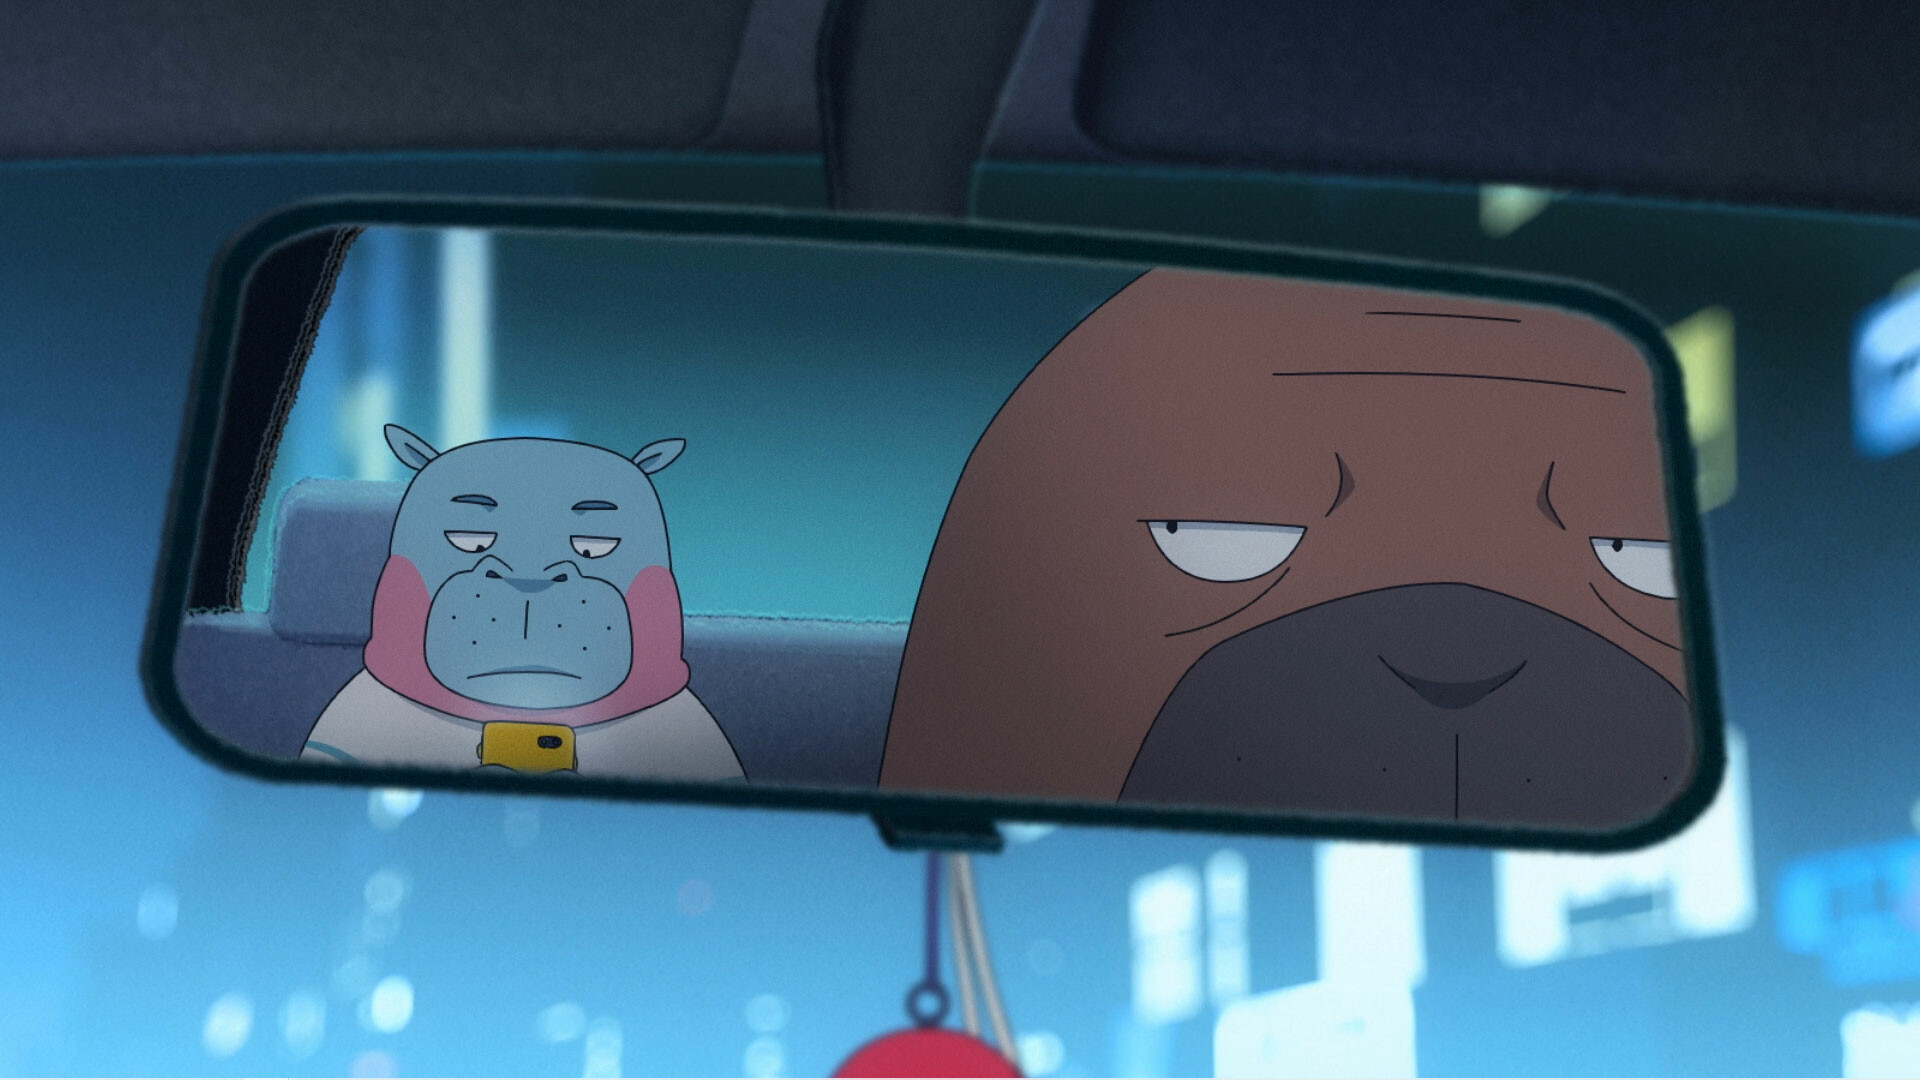 Odd Taxi: Season 1, Episode 1, A Japanese anime television series and manga. 1920x1080 Full HD Wallpaper.